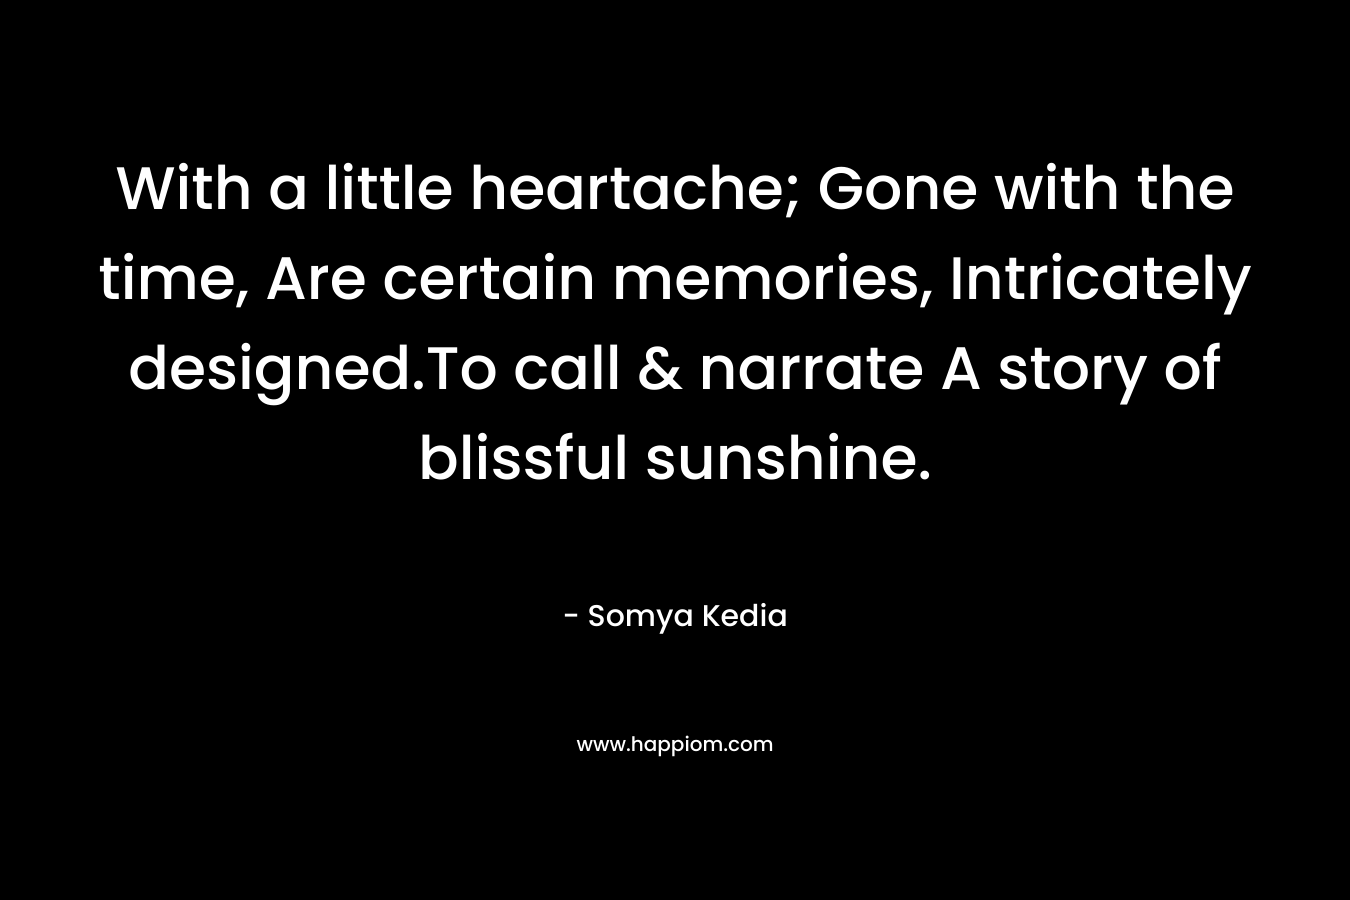 With a little heartache; Gone with the time, Are certain memories, Intricately designed.To call & narrate A story of blissful sunshine. – Somya Kedia